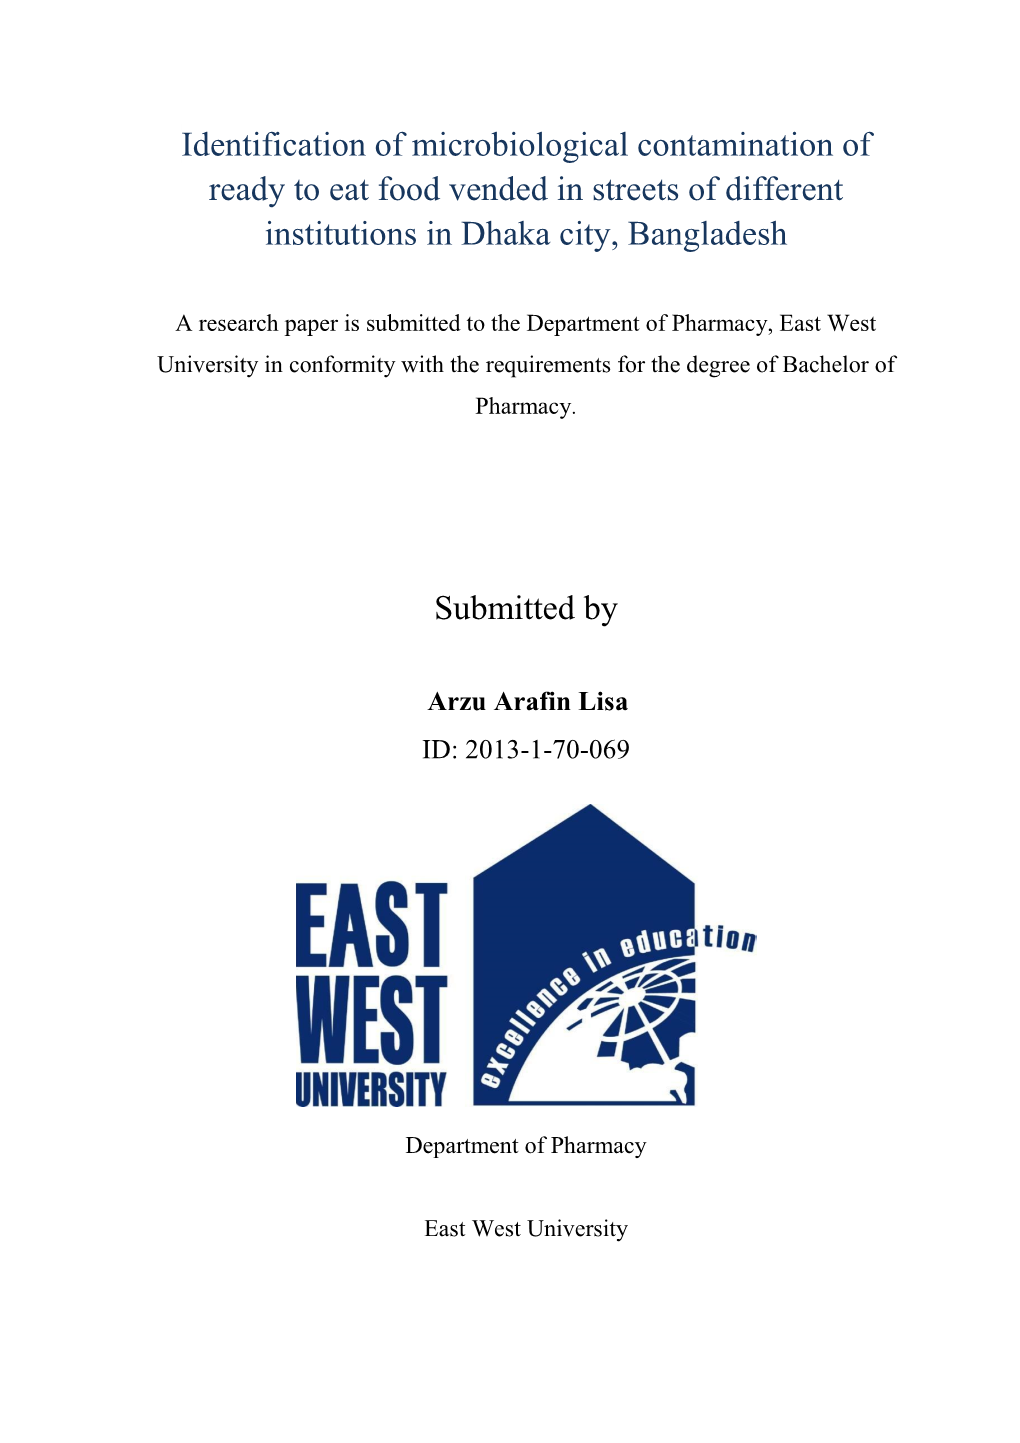 Identification of Microbiological Contamination of Ready to Eat Food Vended in Streets of Different Institutions in Dhaka City, Bangladesh